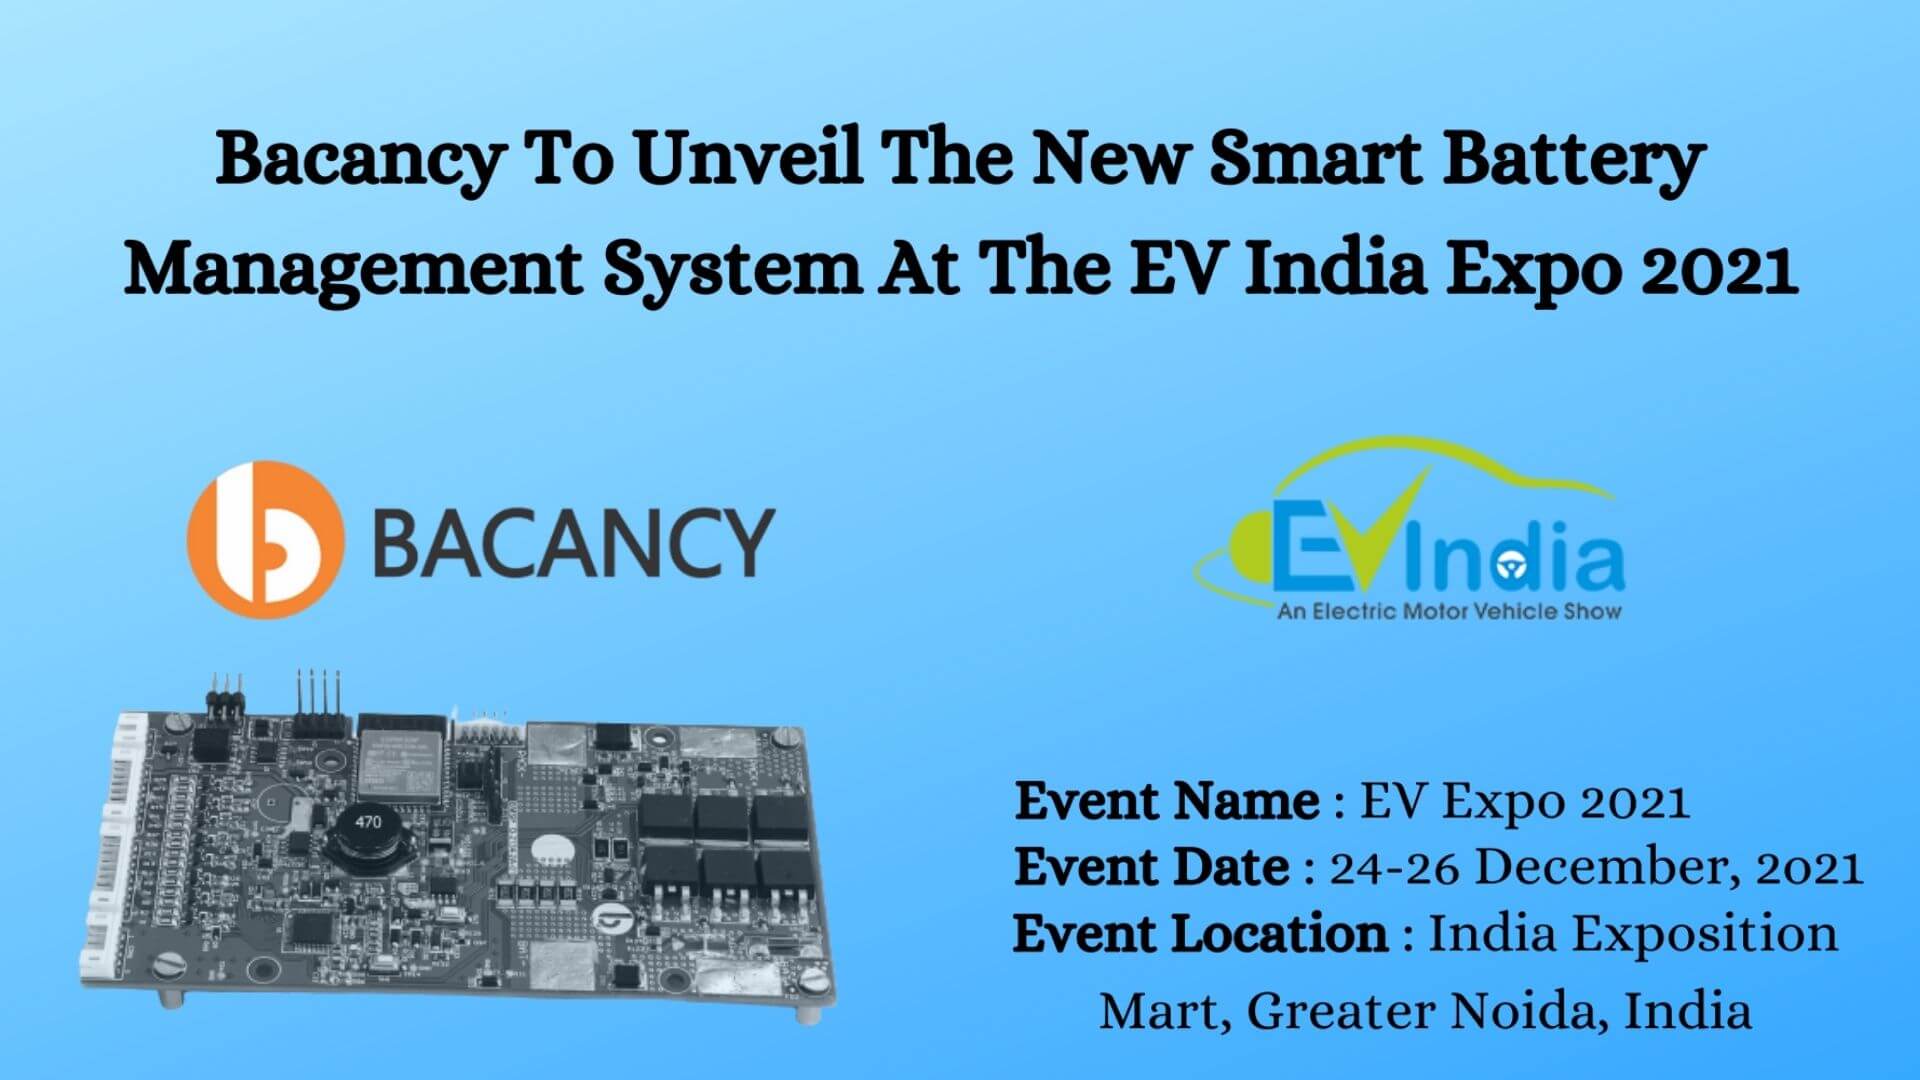 https://e-vehicleinfo.com/bacancy-to-unveil-the-smart-battery-management-system/